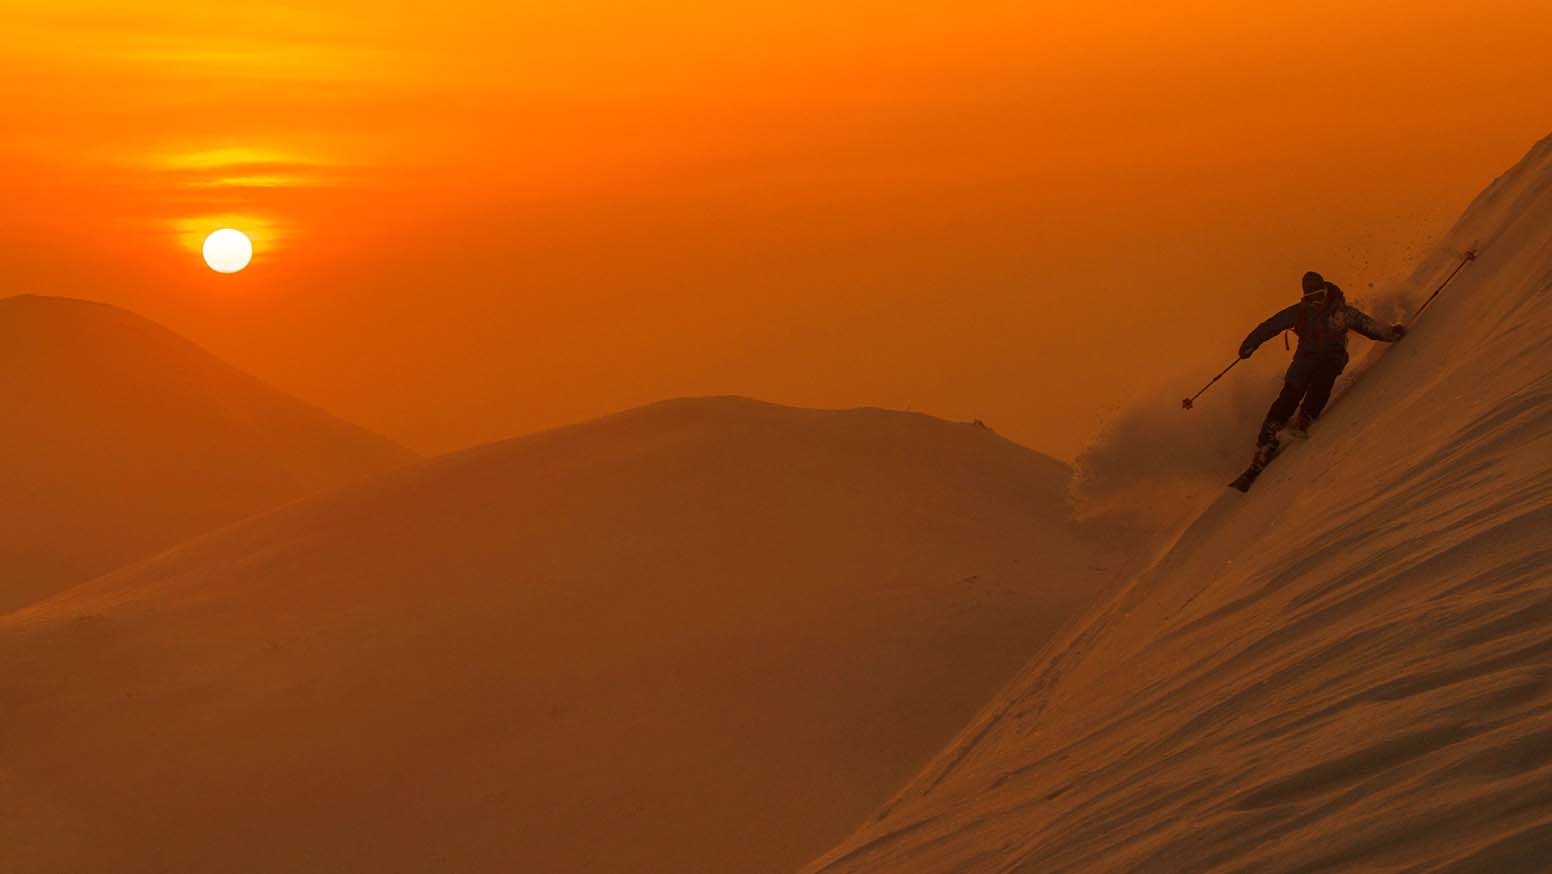 A person skiing in the snow during sunrise